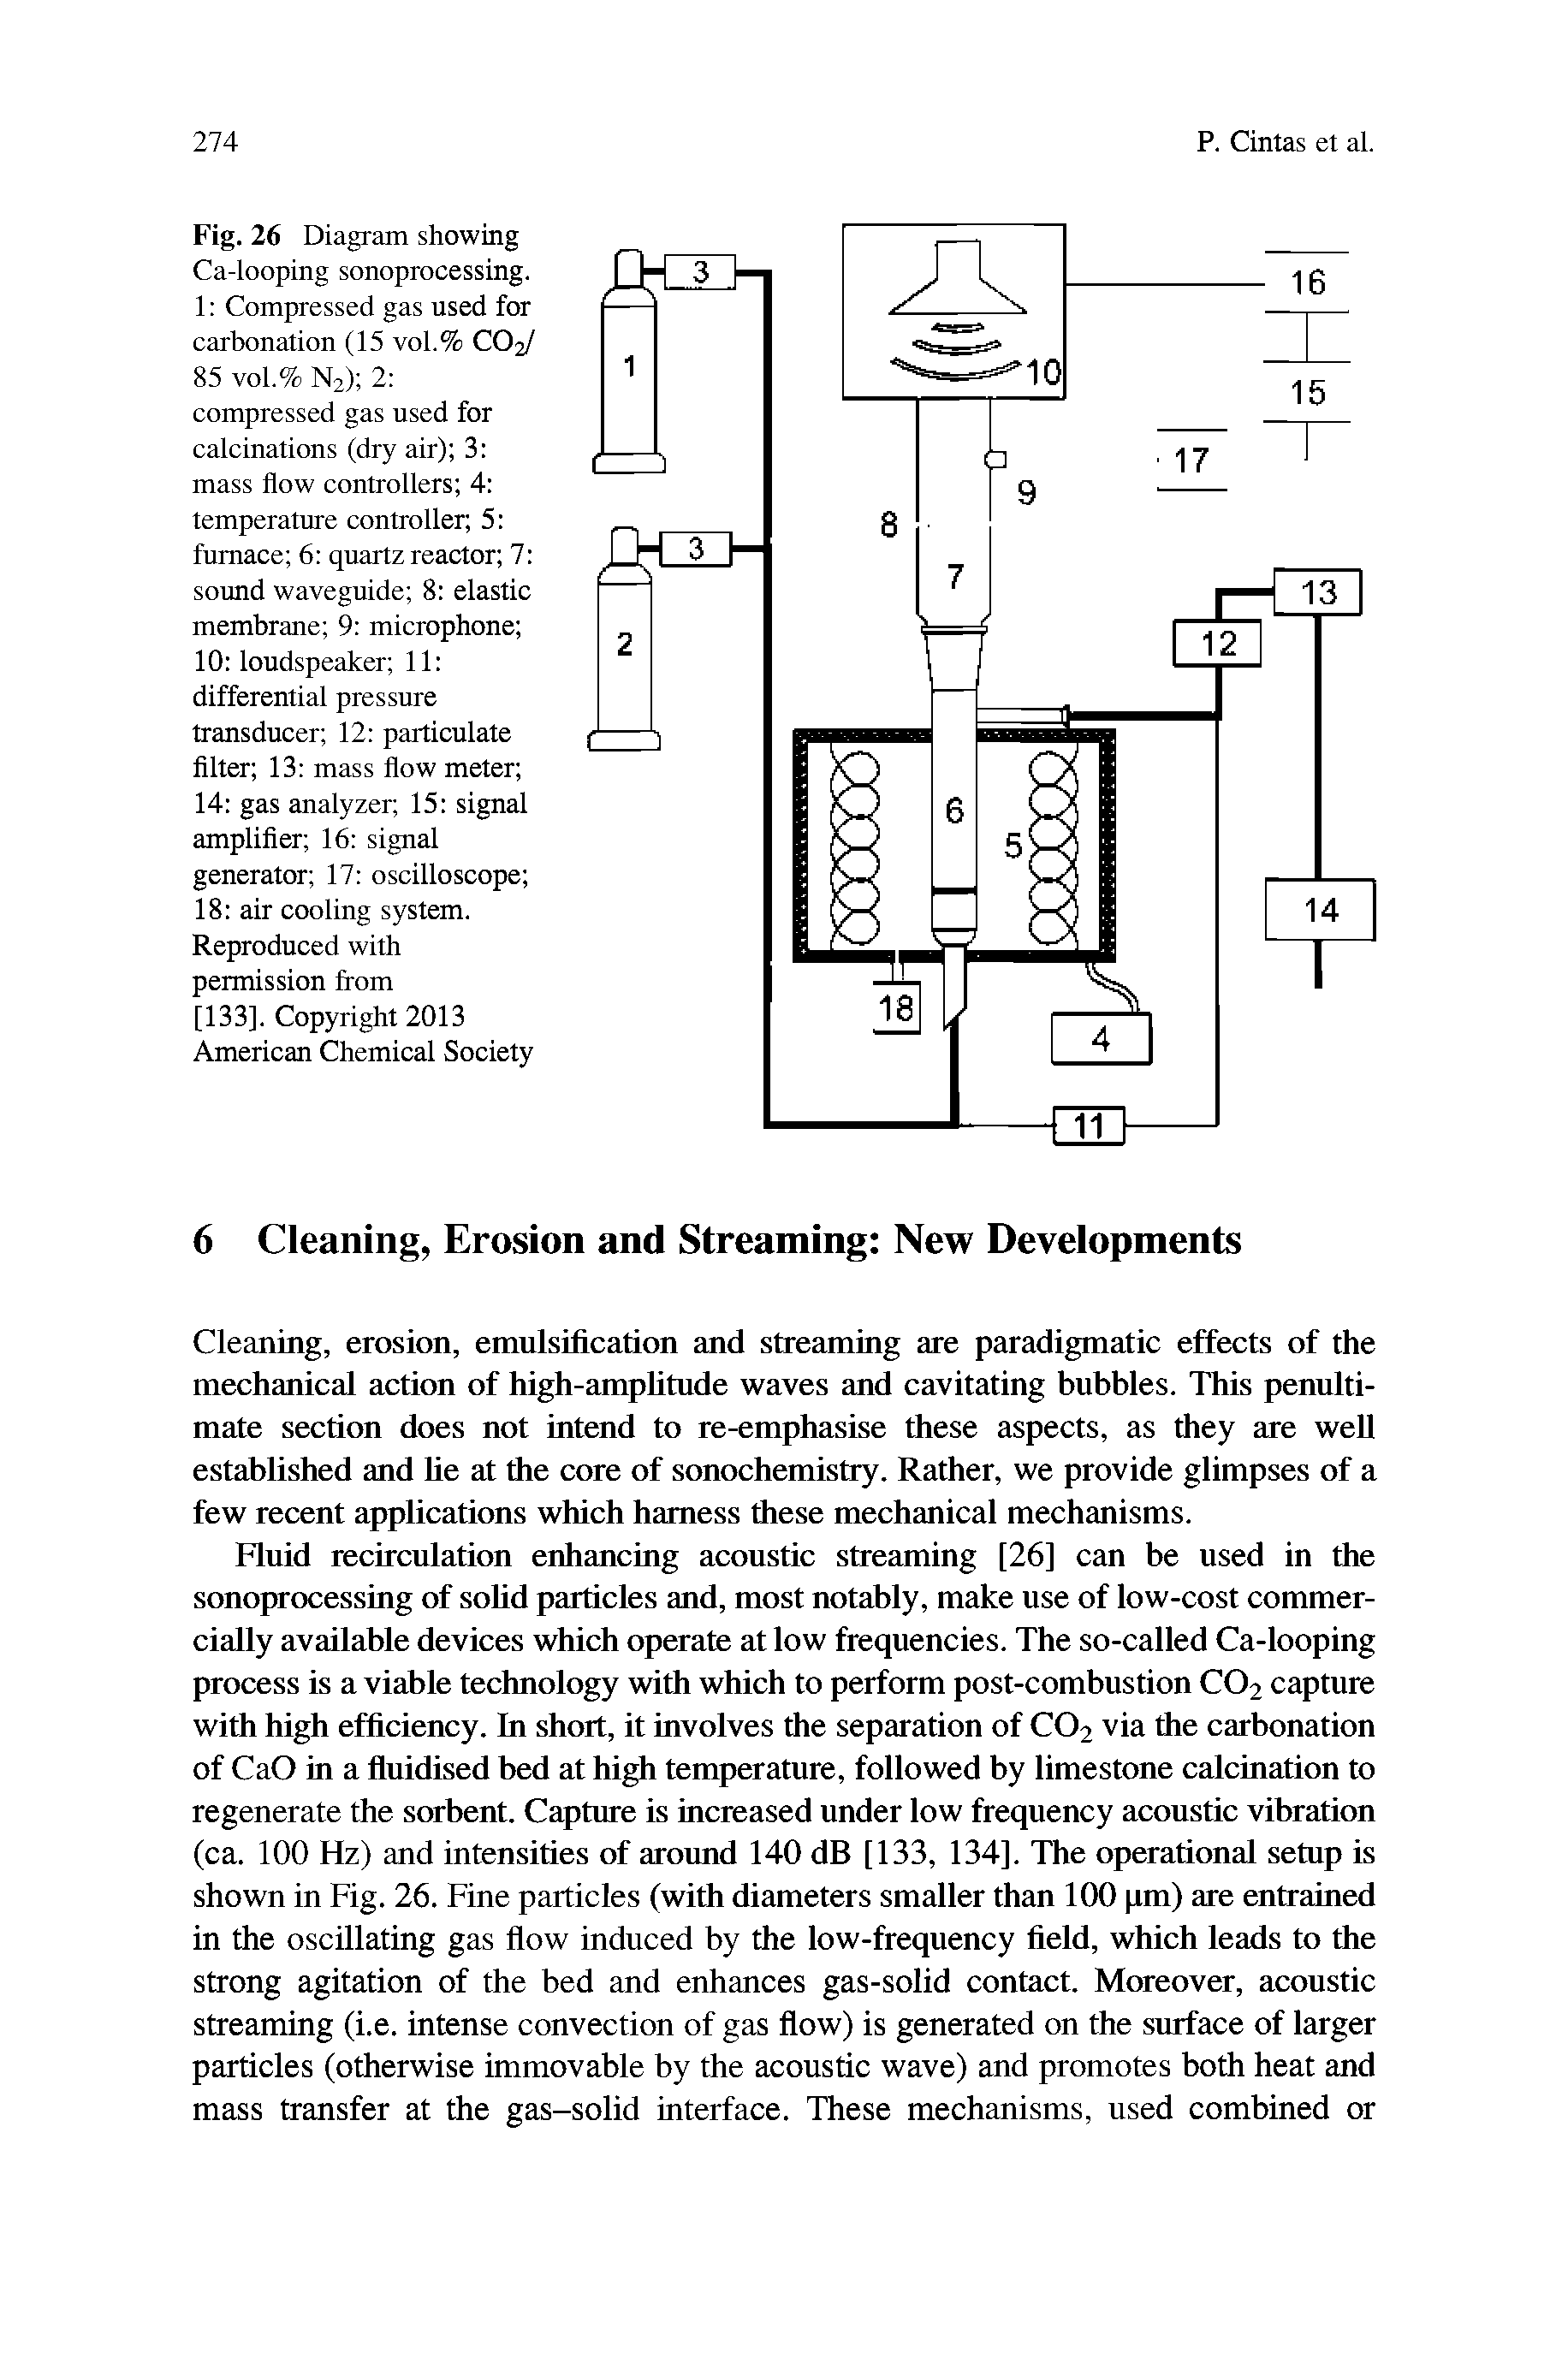 Fig. 26 Diagram showing Ca-looping sonoprocessing. 1 Compressed gas used for carbonation (15 vol.% CO2/ 85 vol.% N2) 2 compressed gas used for calcinations (dry air) 3 mass flow controllers 4 temperature controller 5 furnace 6 quartz reactor 7 sound waveguide 8 elastic membrane 9 microphone 10 loudspeaker 11 differential pressure transducer 12 particulate filter 13 mass flow meter 14 gas analyzer 15 signal amplifier 16 signal generator 17 oscilloscope 18 air cooling system. Reproduced with permission from [133], Copyright 2013 American Chemical Society...